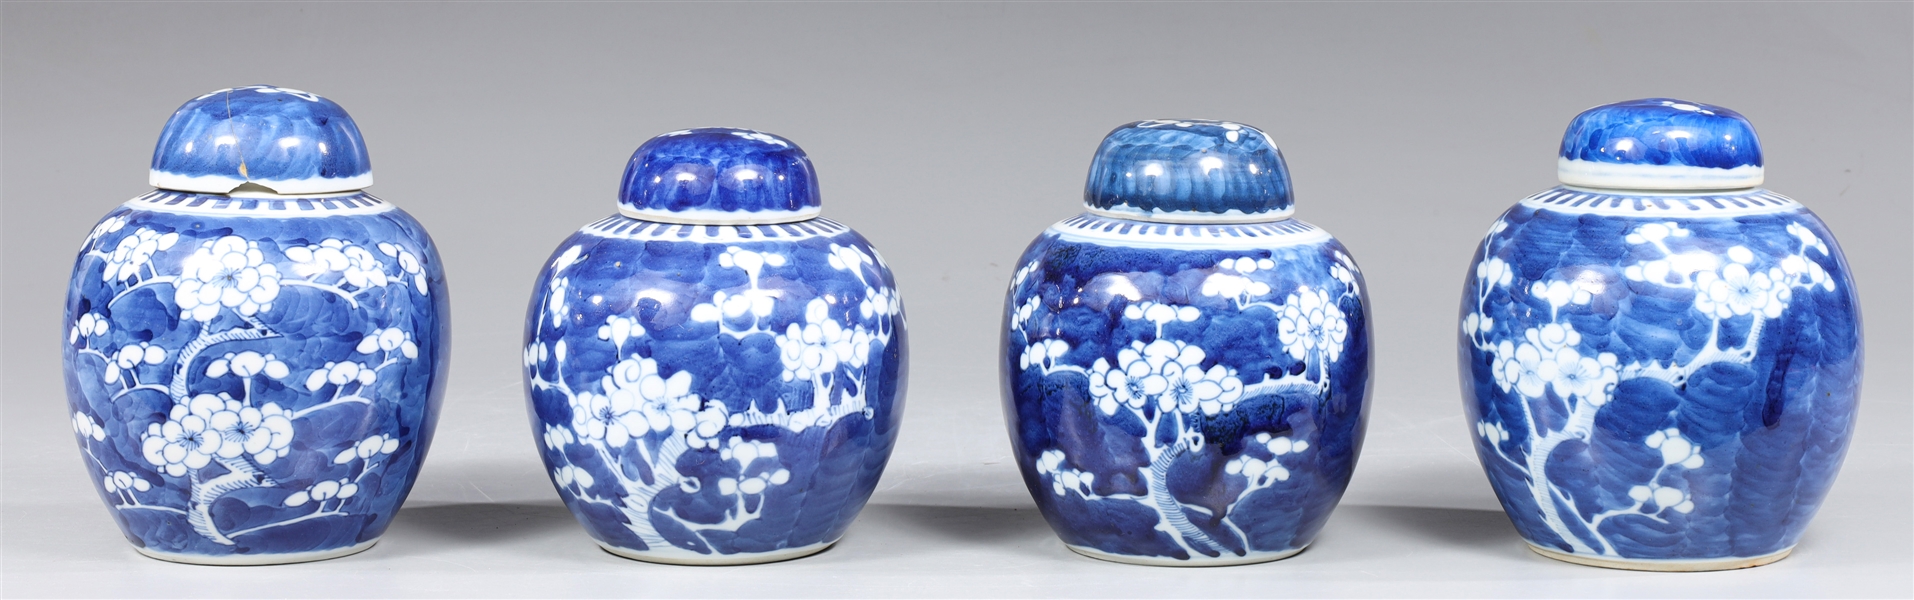 Group of four vintage Chinese blue